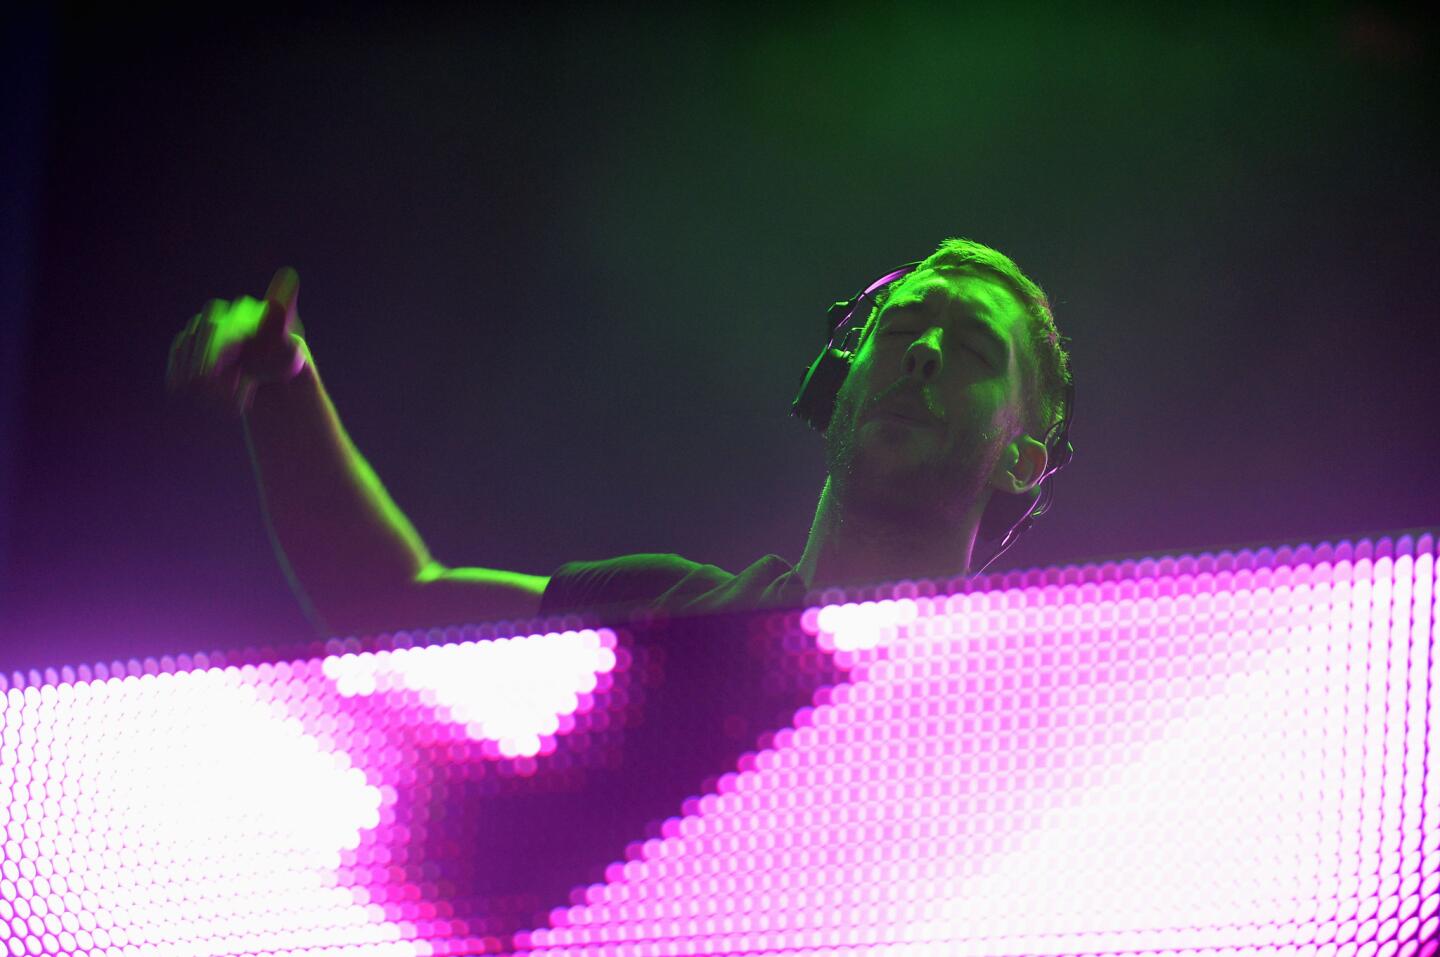 Calvin Harris tops Forbes' best-paid DJ list for 2013